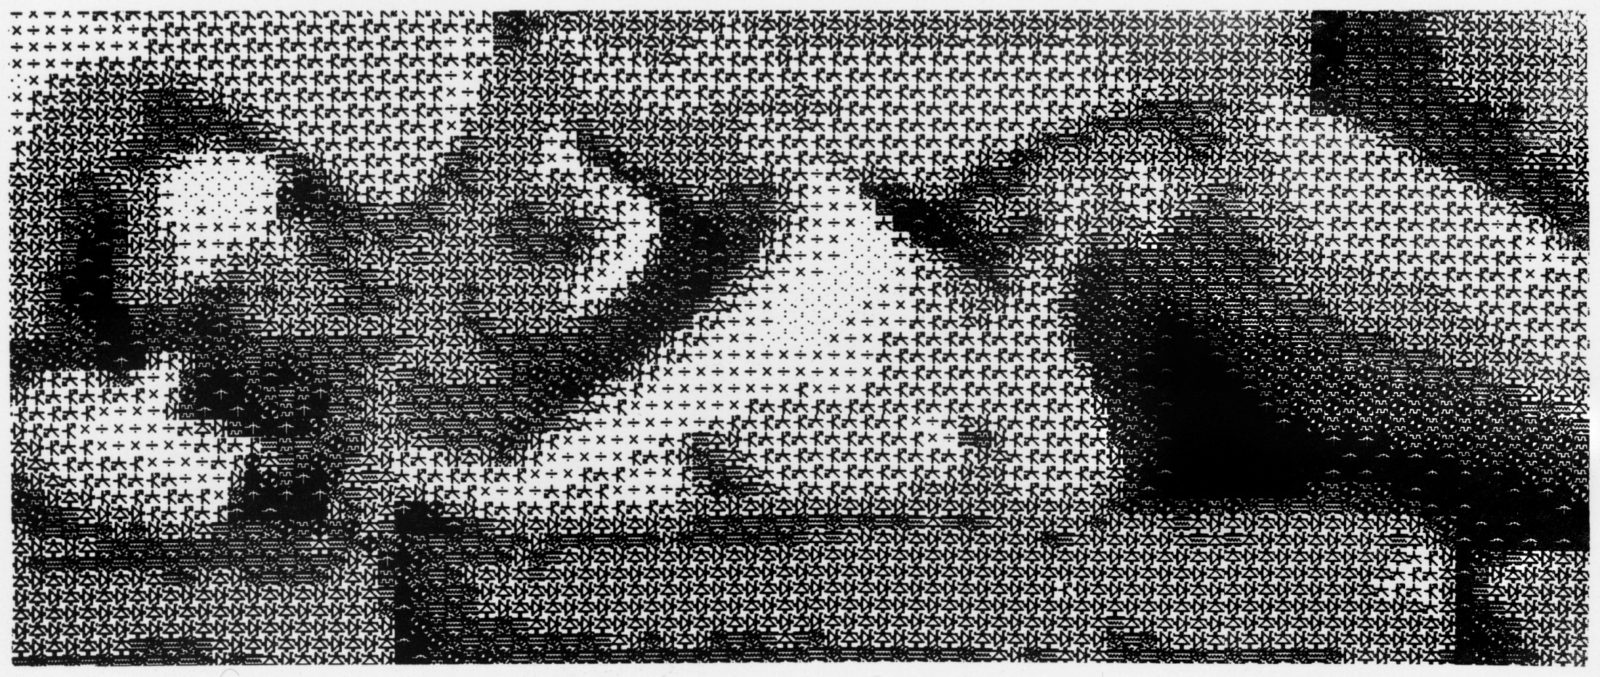 A nude photograph was reconstituted through a programming language using bitmap symbols.